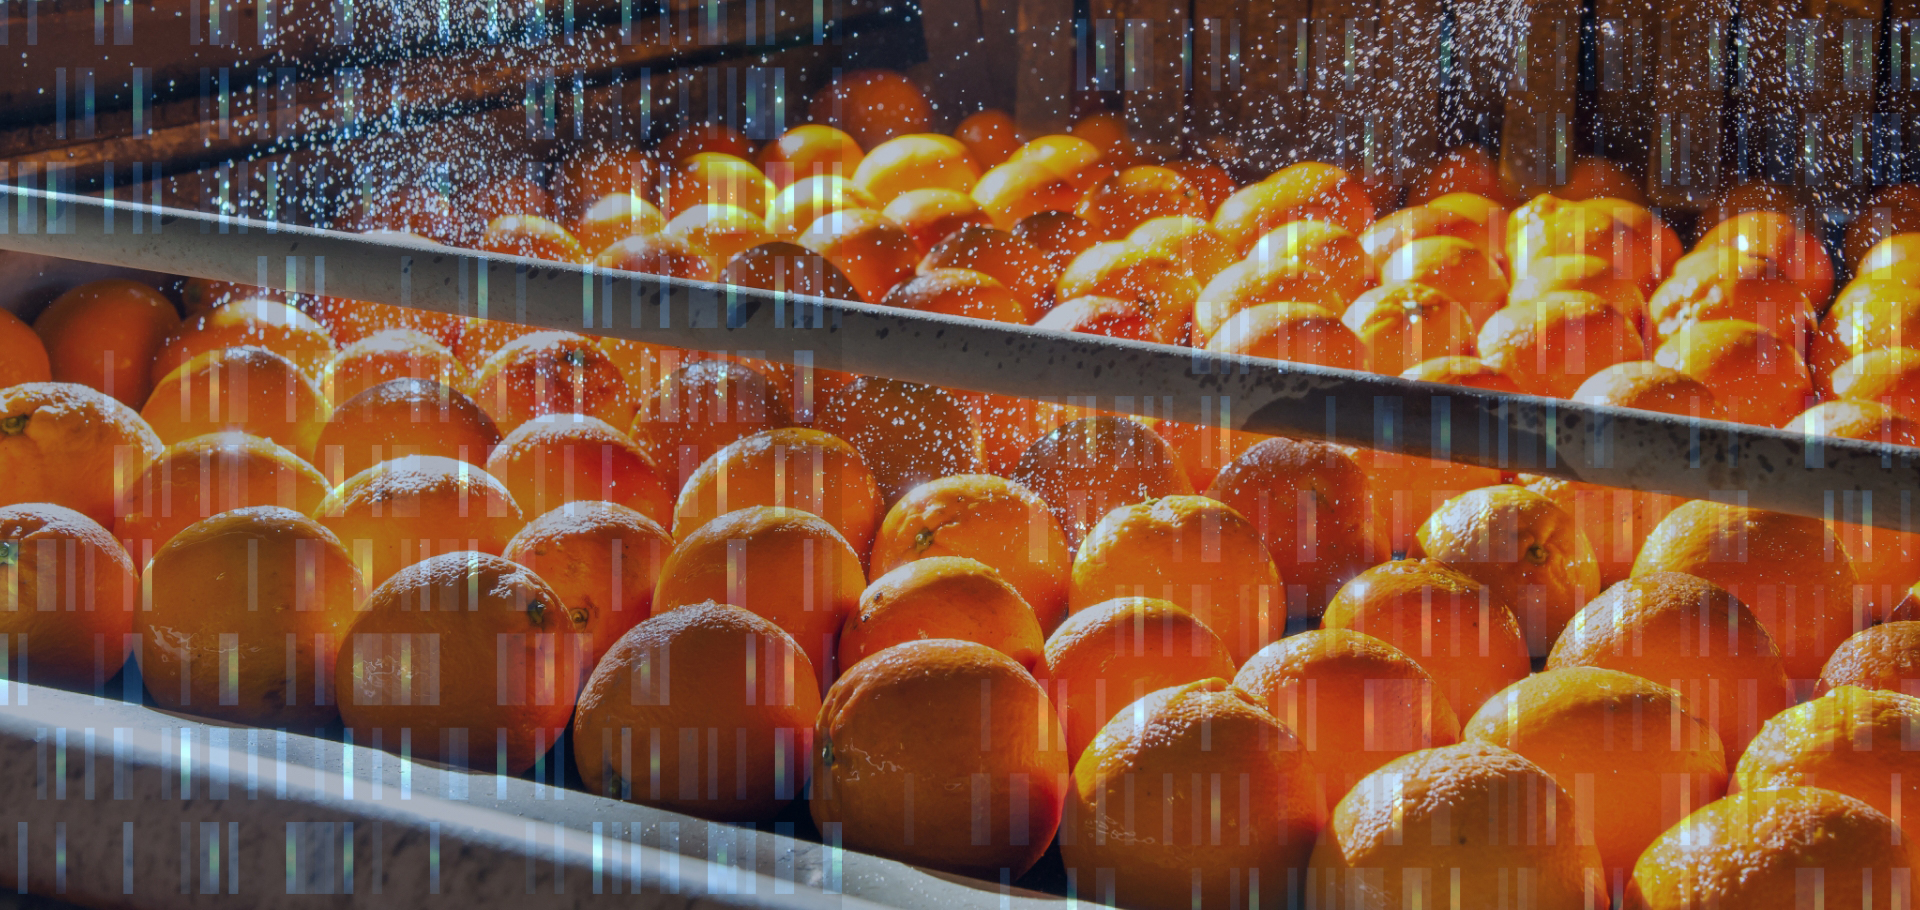 Background of Oranges being processed